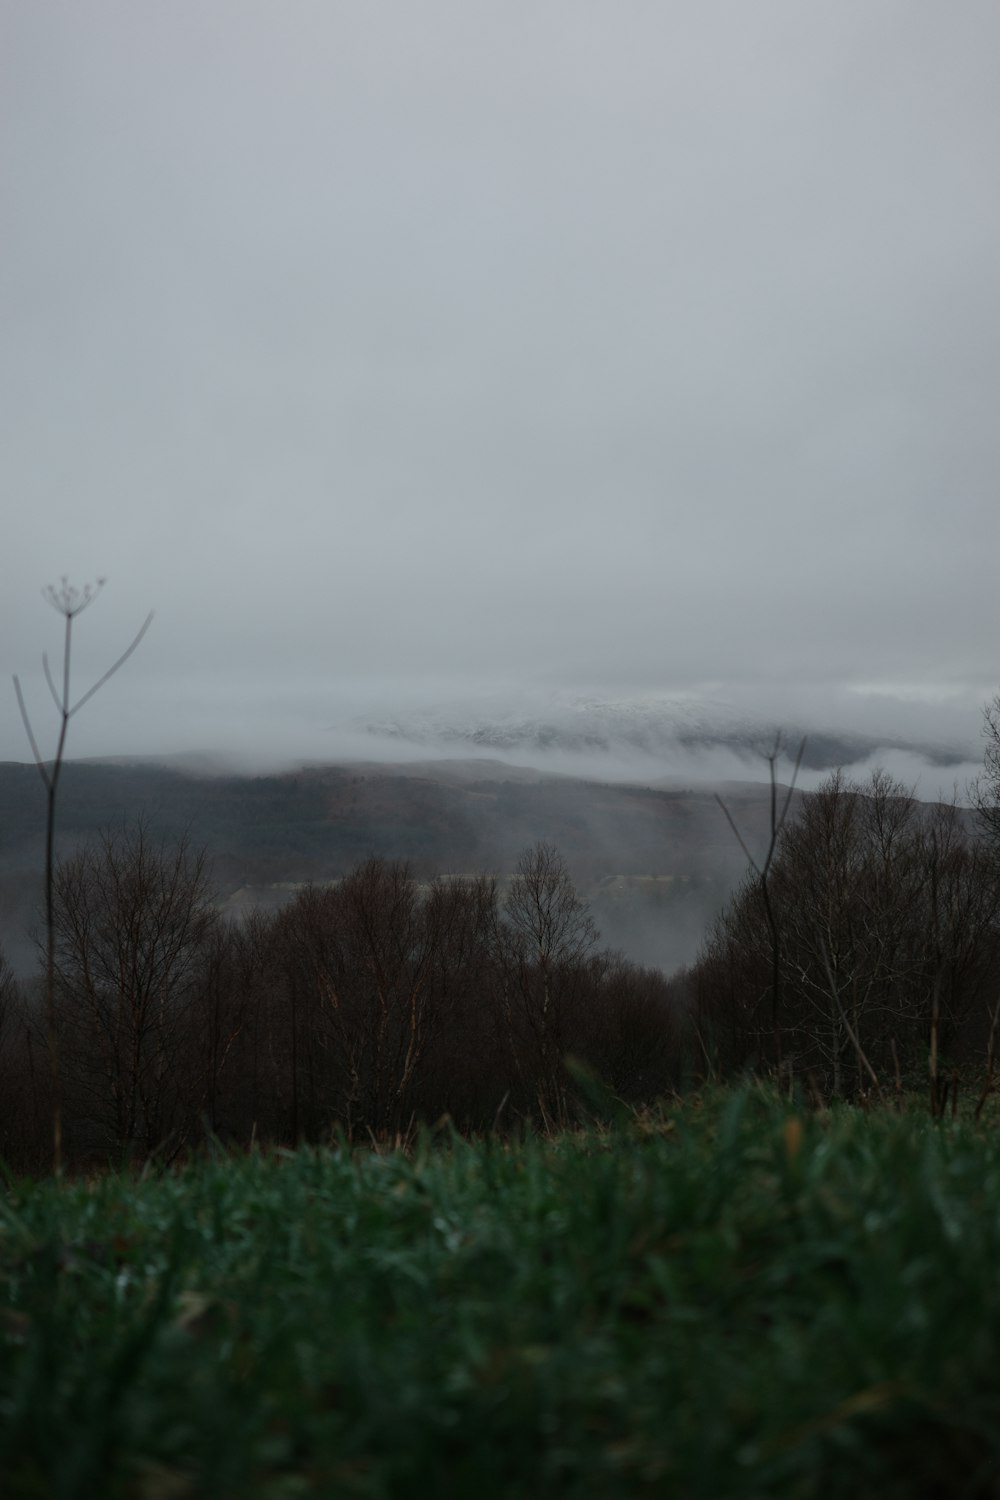 a foggy landscape with trees and a hill in the distance